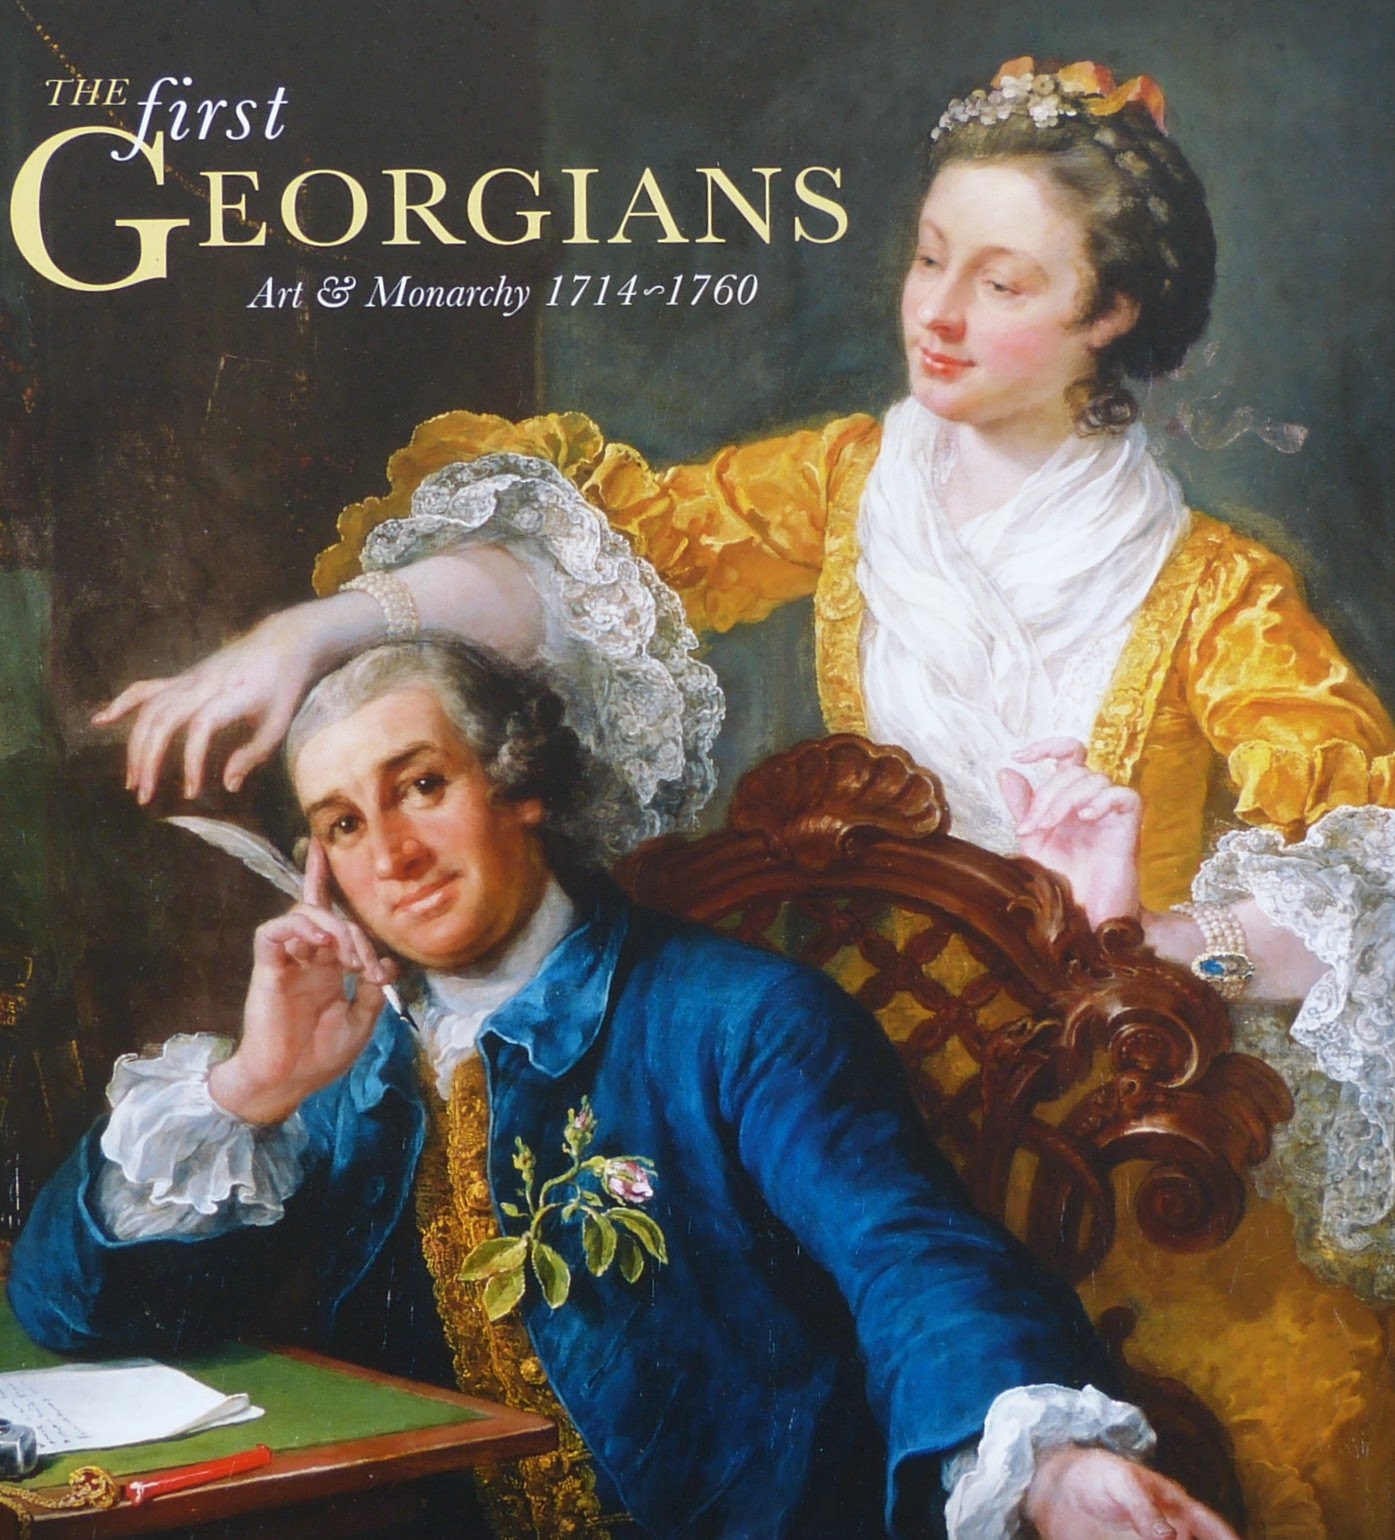 David and Eva Garrick by Hogarth  on poster advertising The First Georgians exhibition